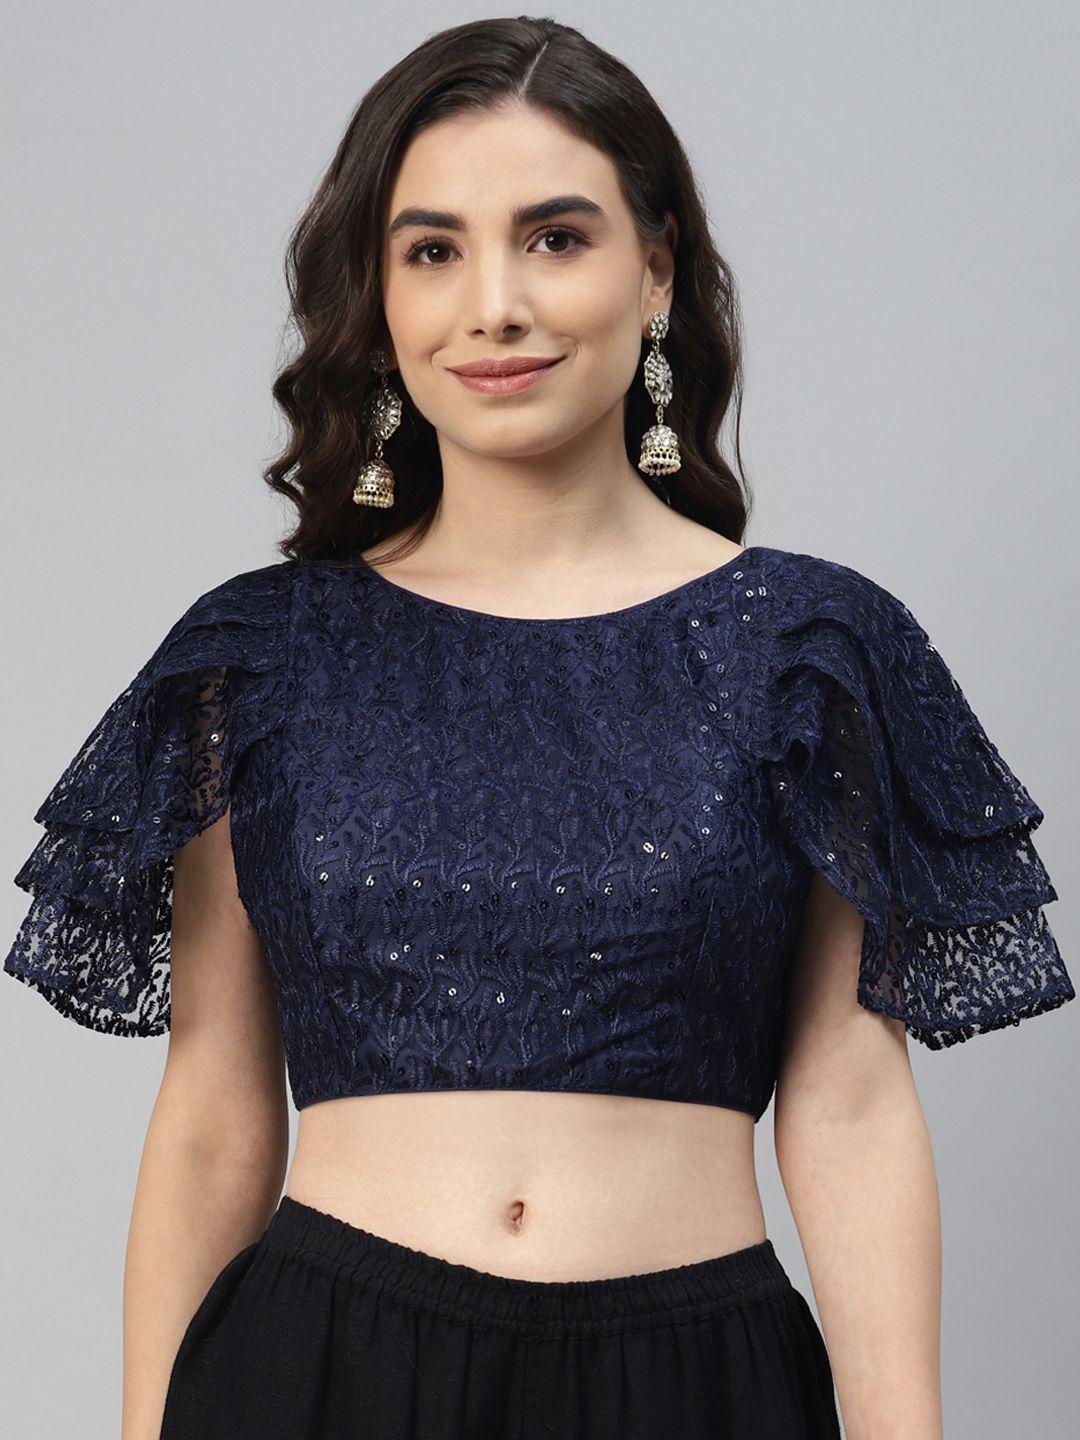 shopgarb women navy blue sequined padded saree blouse